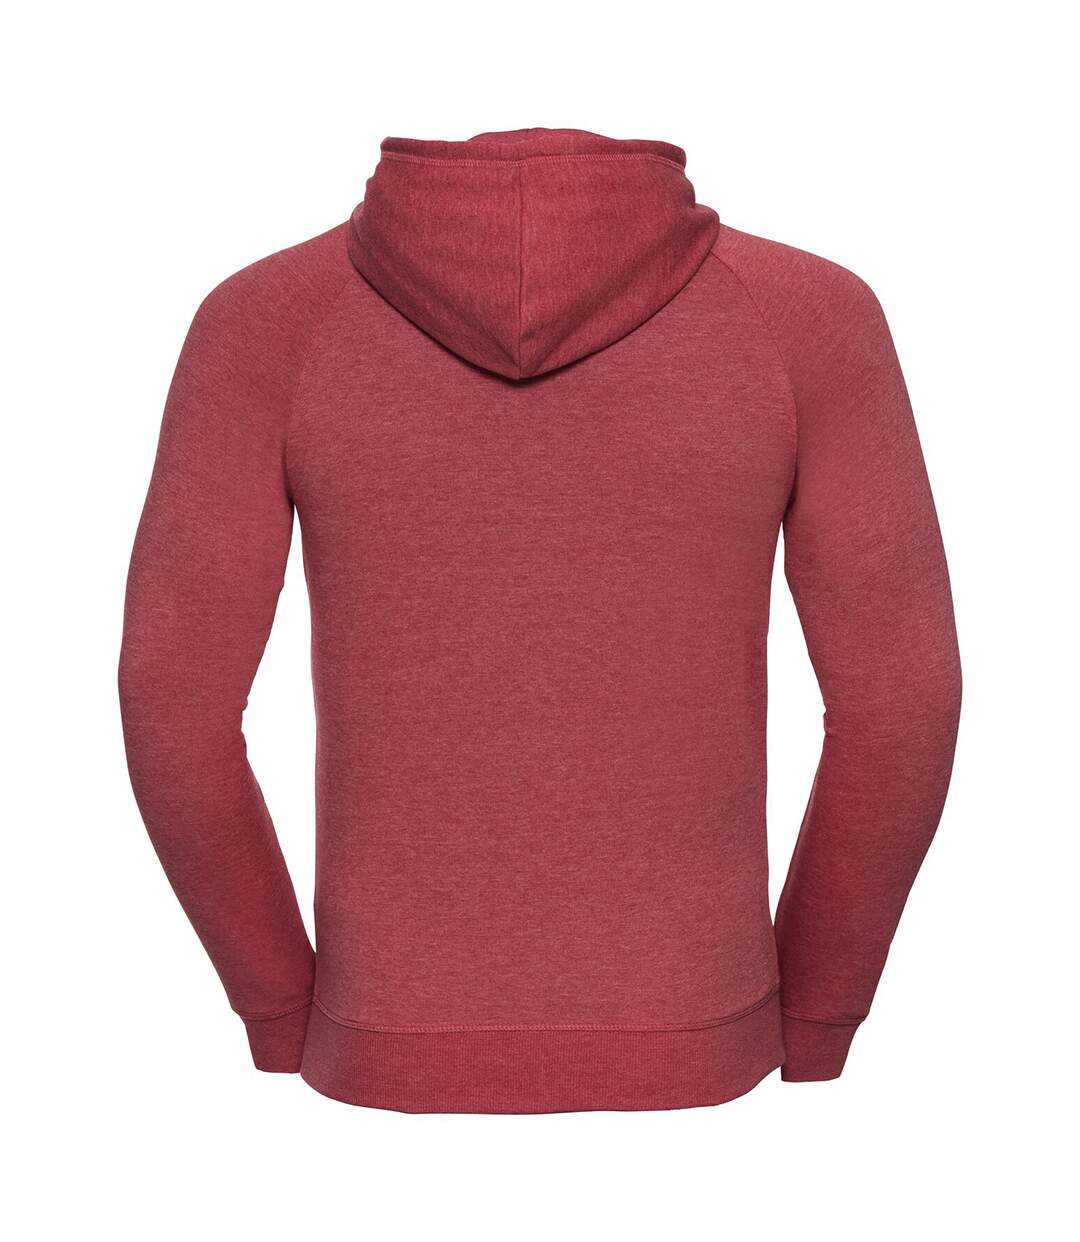 Russell HD - Sweat à capuche - Homme (Rouge marne) - UTRW5504